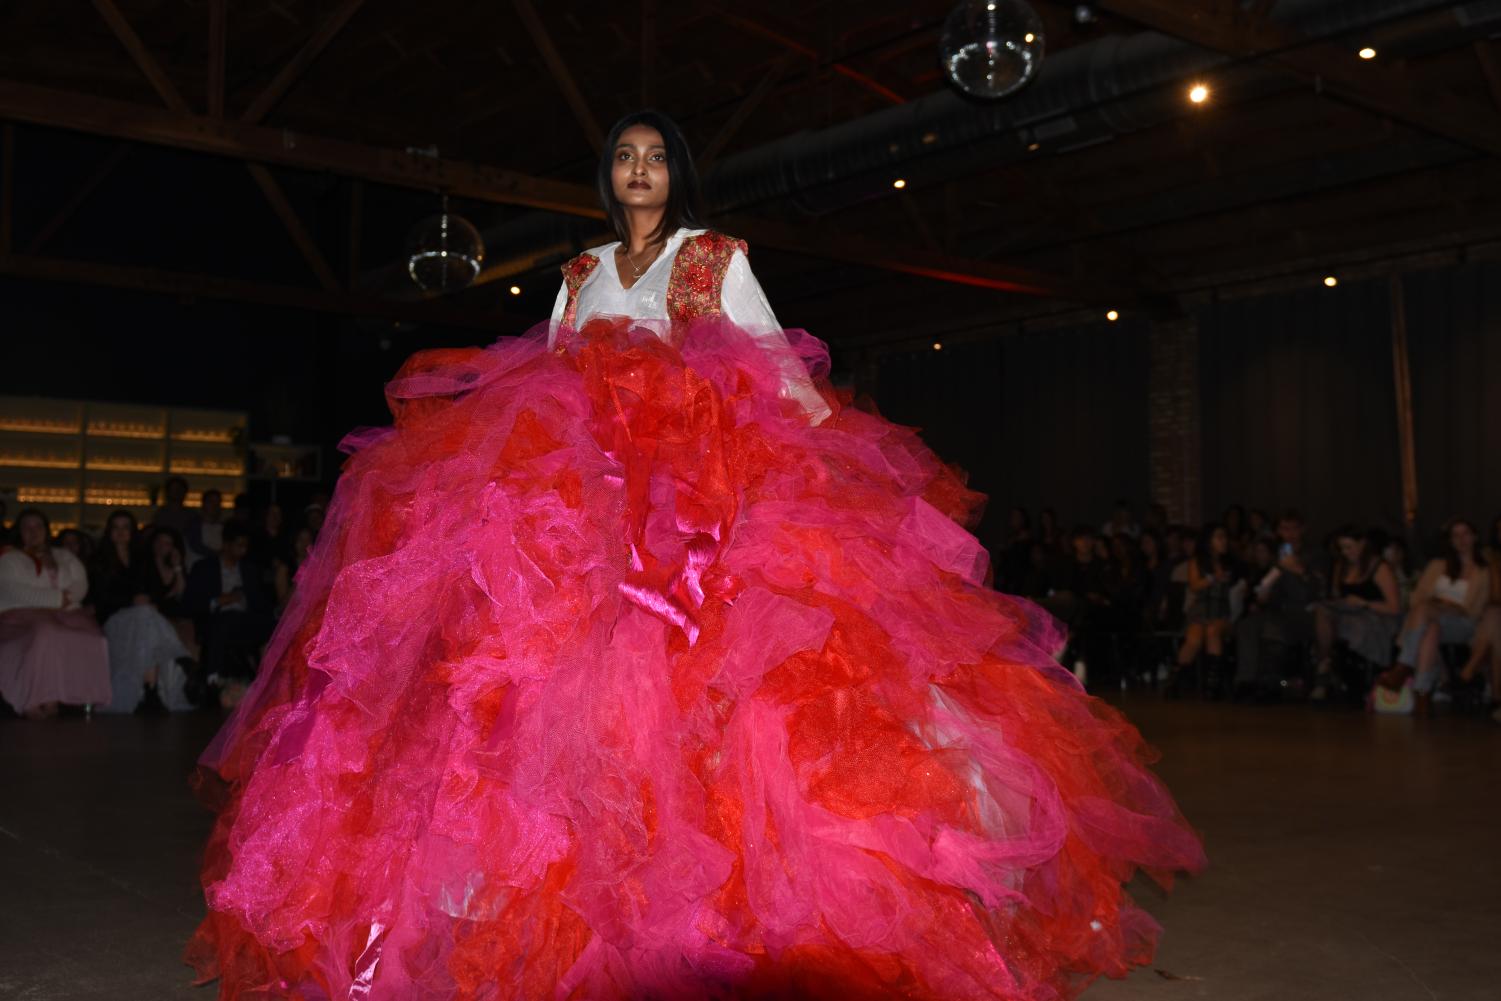 A+model+wearing+a+bright+pink+and+red+gown+walks+down+a+runway.